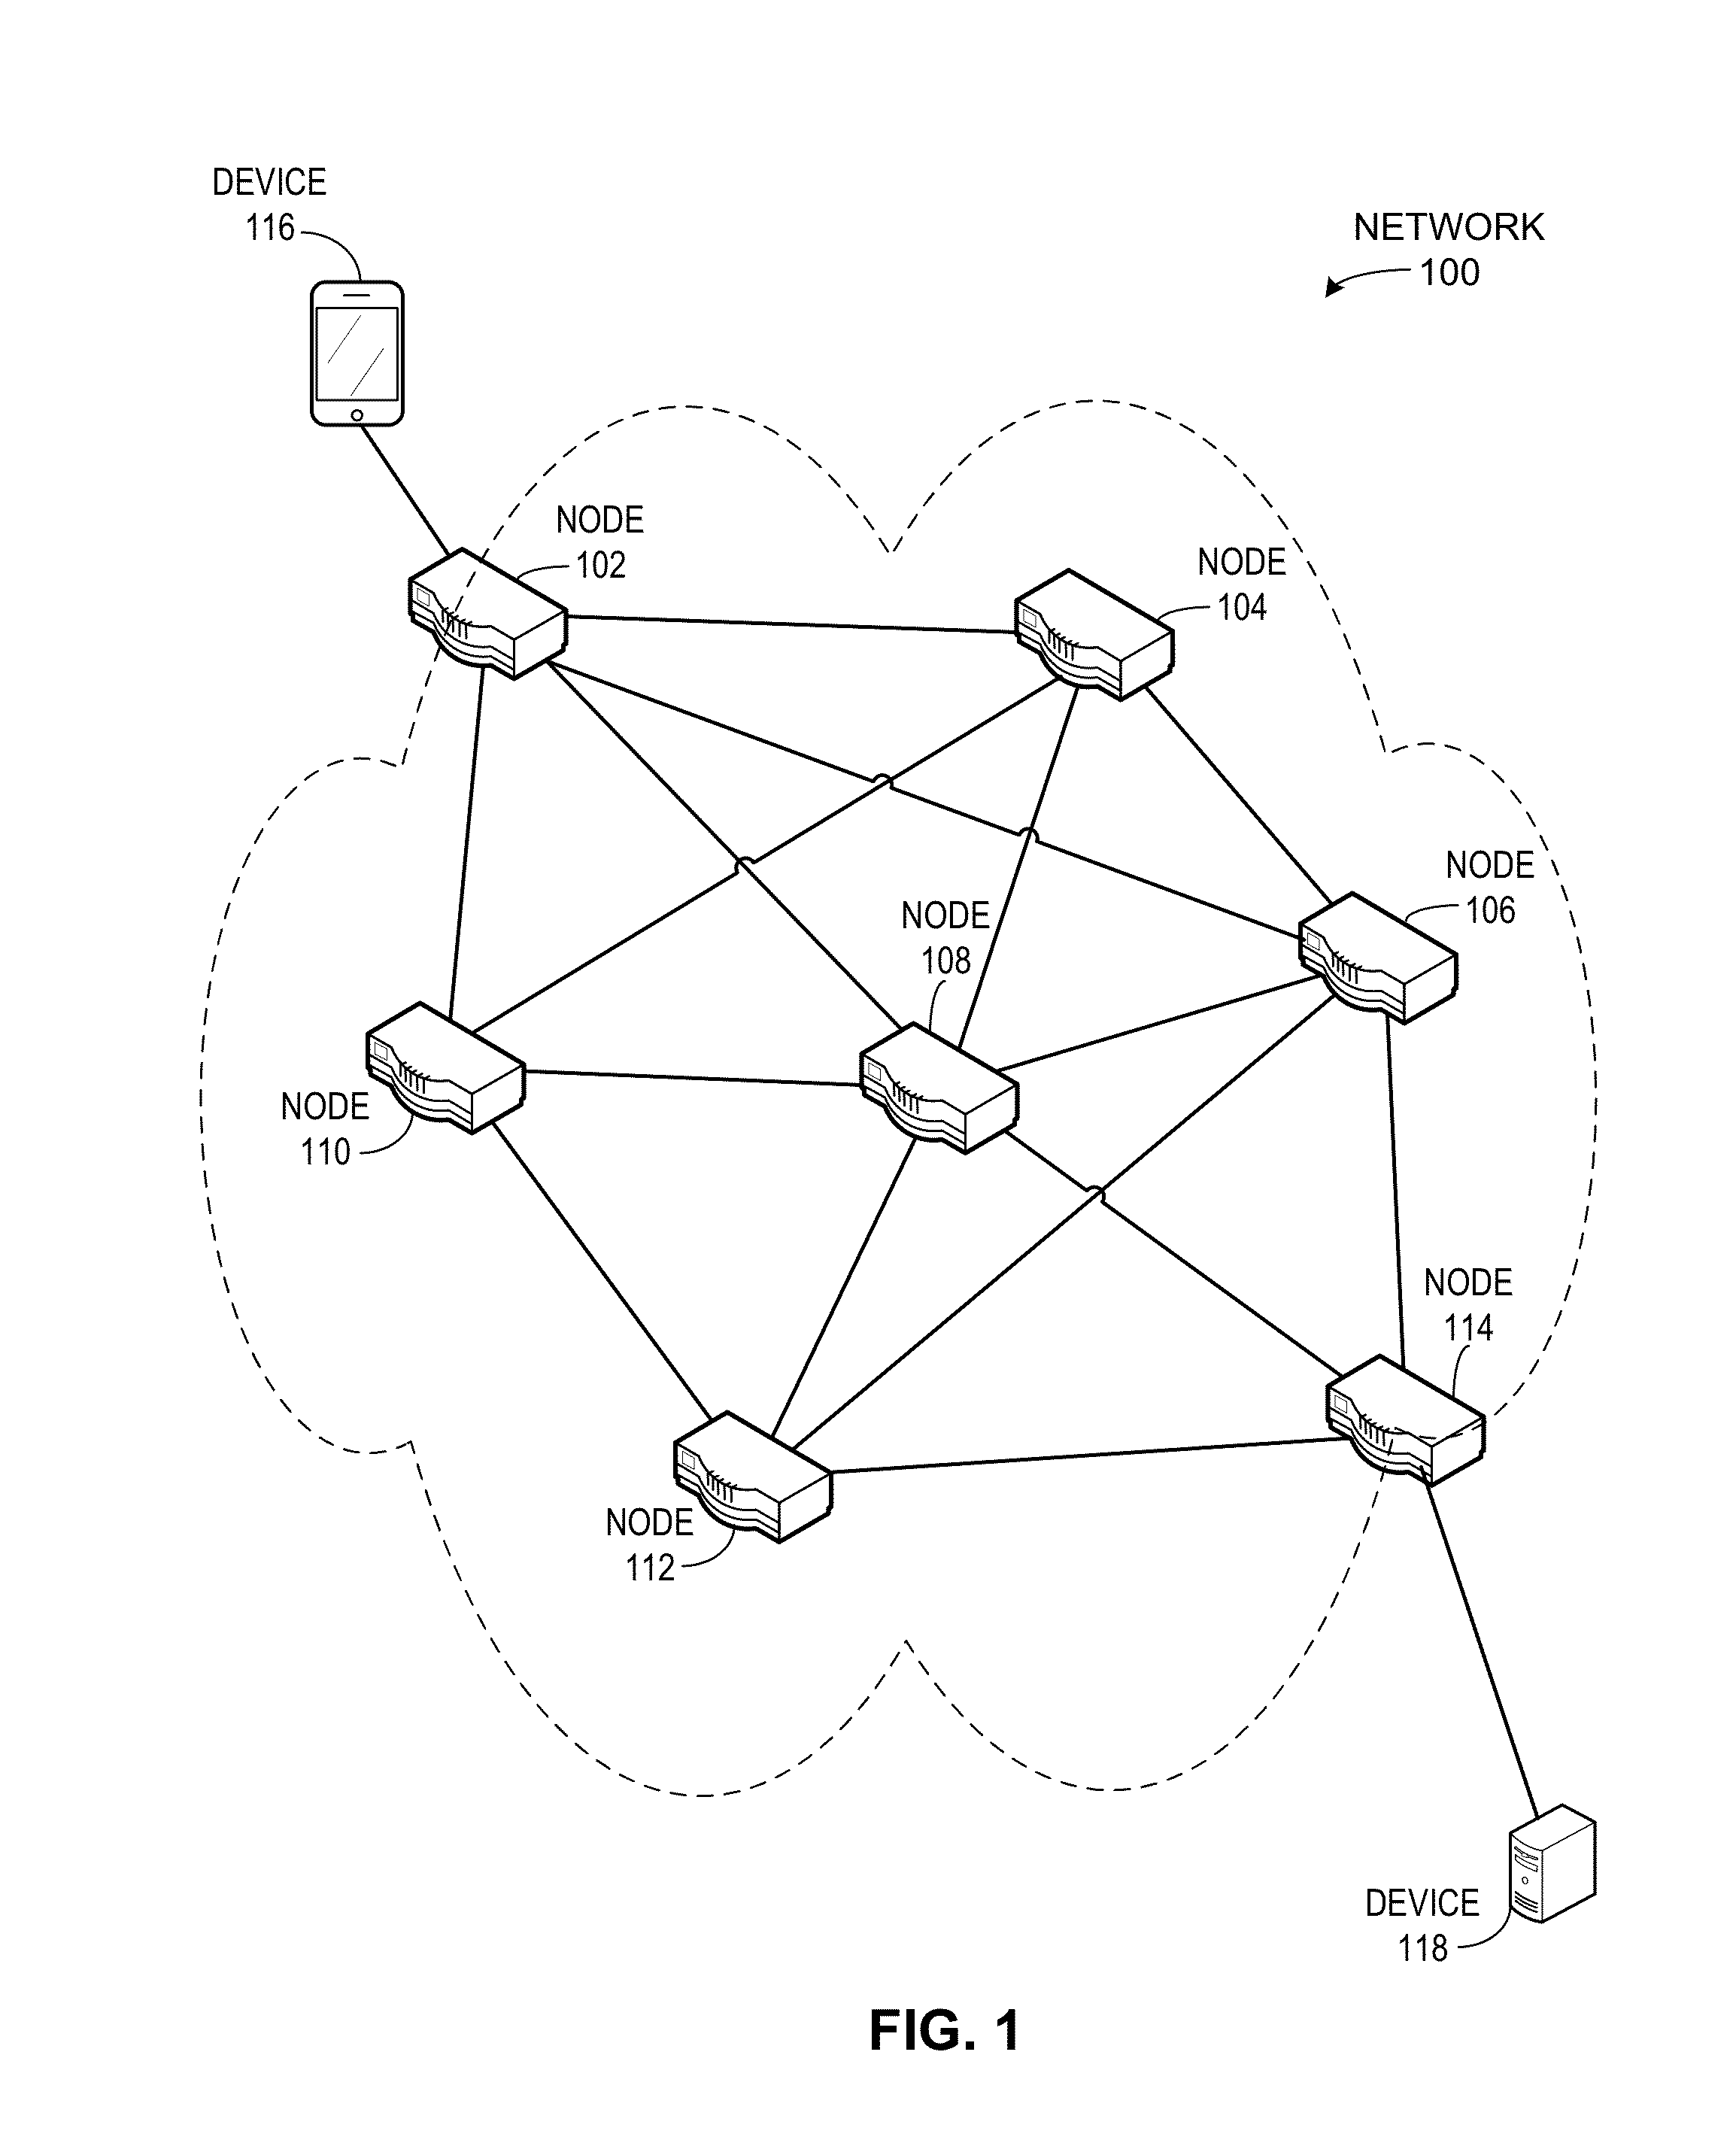 Interest keep alives at intermediate routers in a ccn